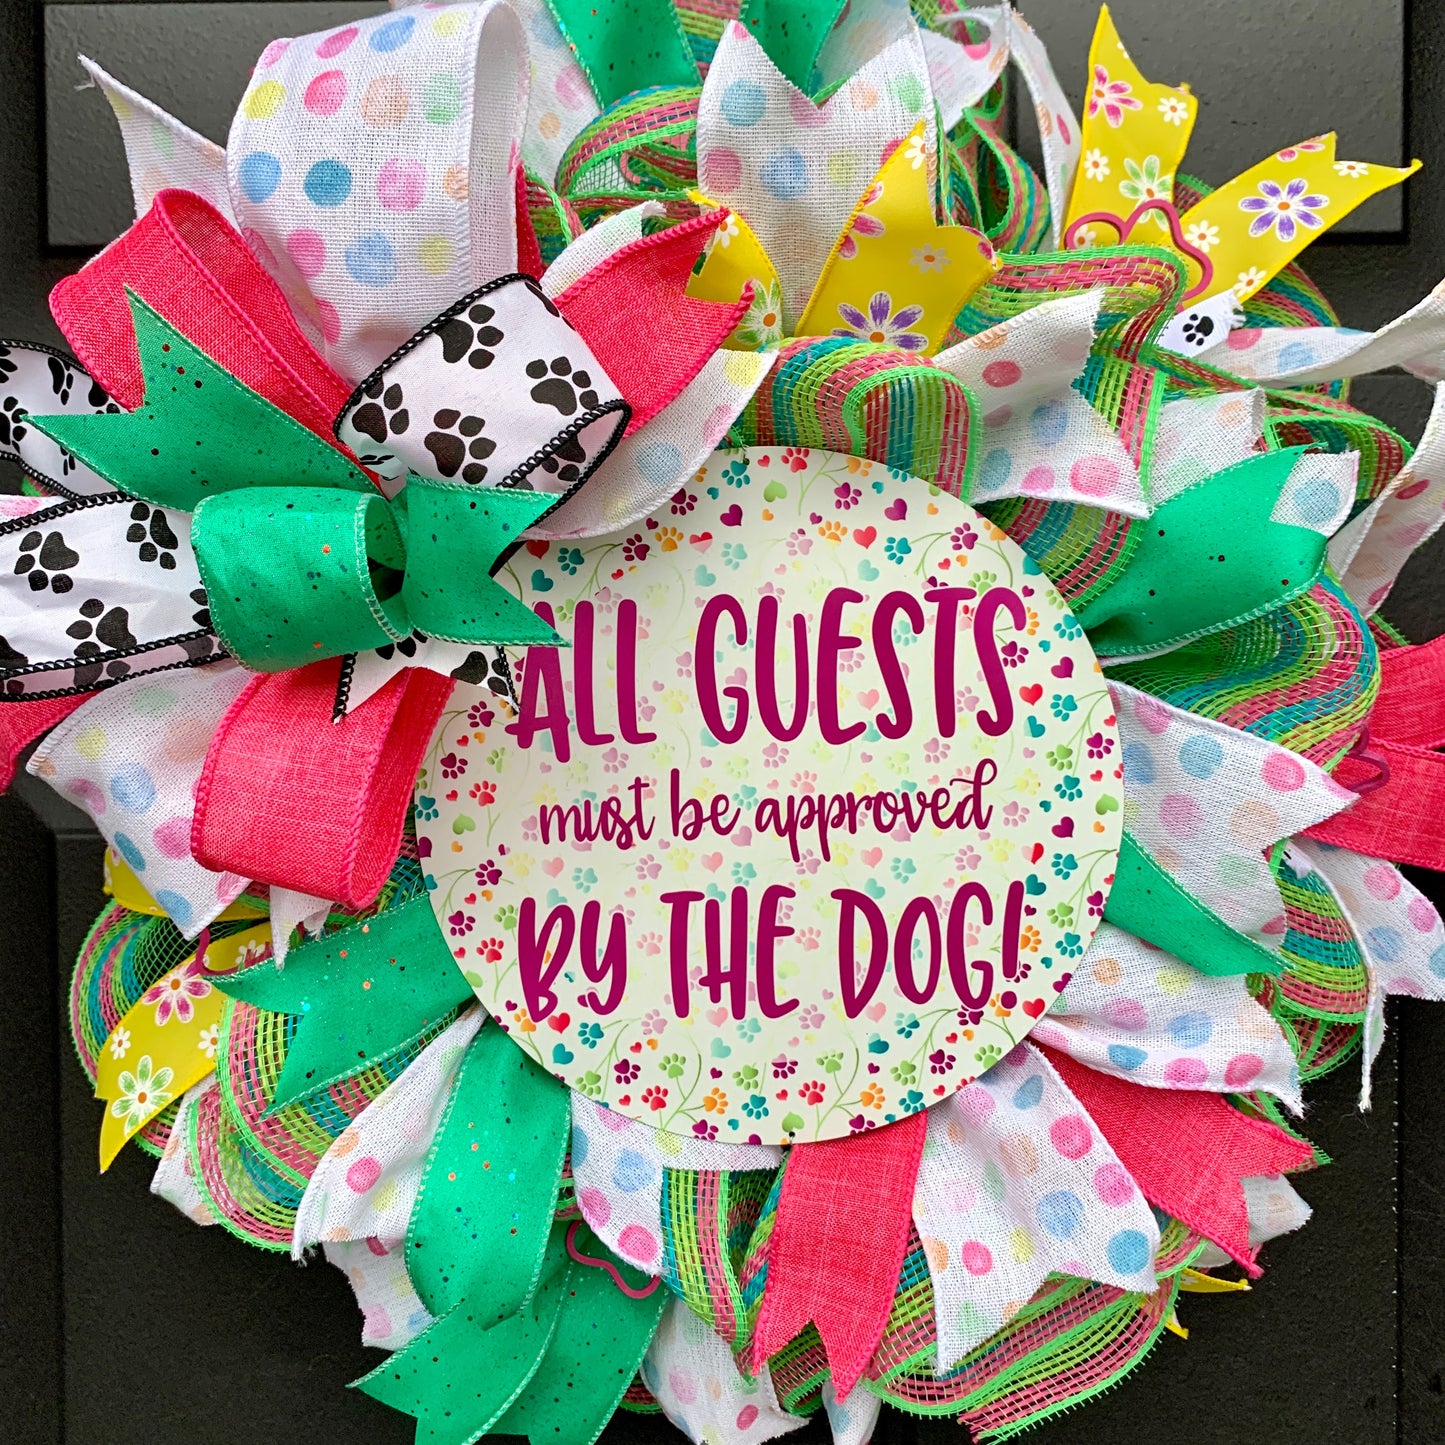 All Guests Must Be Approved By The Dog, Dog Wreath, Dog Decor, Dog Lover Wreath, Dog Paw Print Wreath, Dog Home Decor, Dog Door Hanger For Front Door